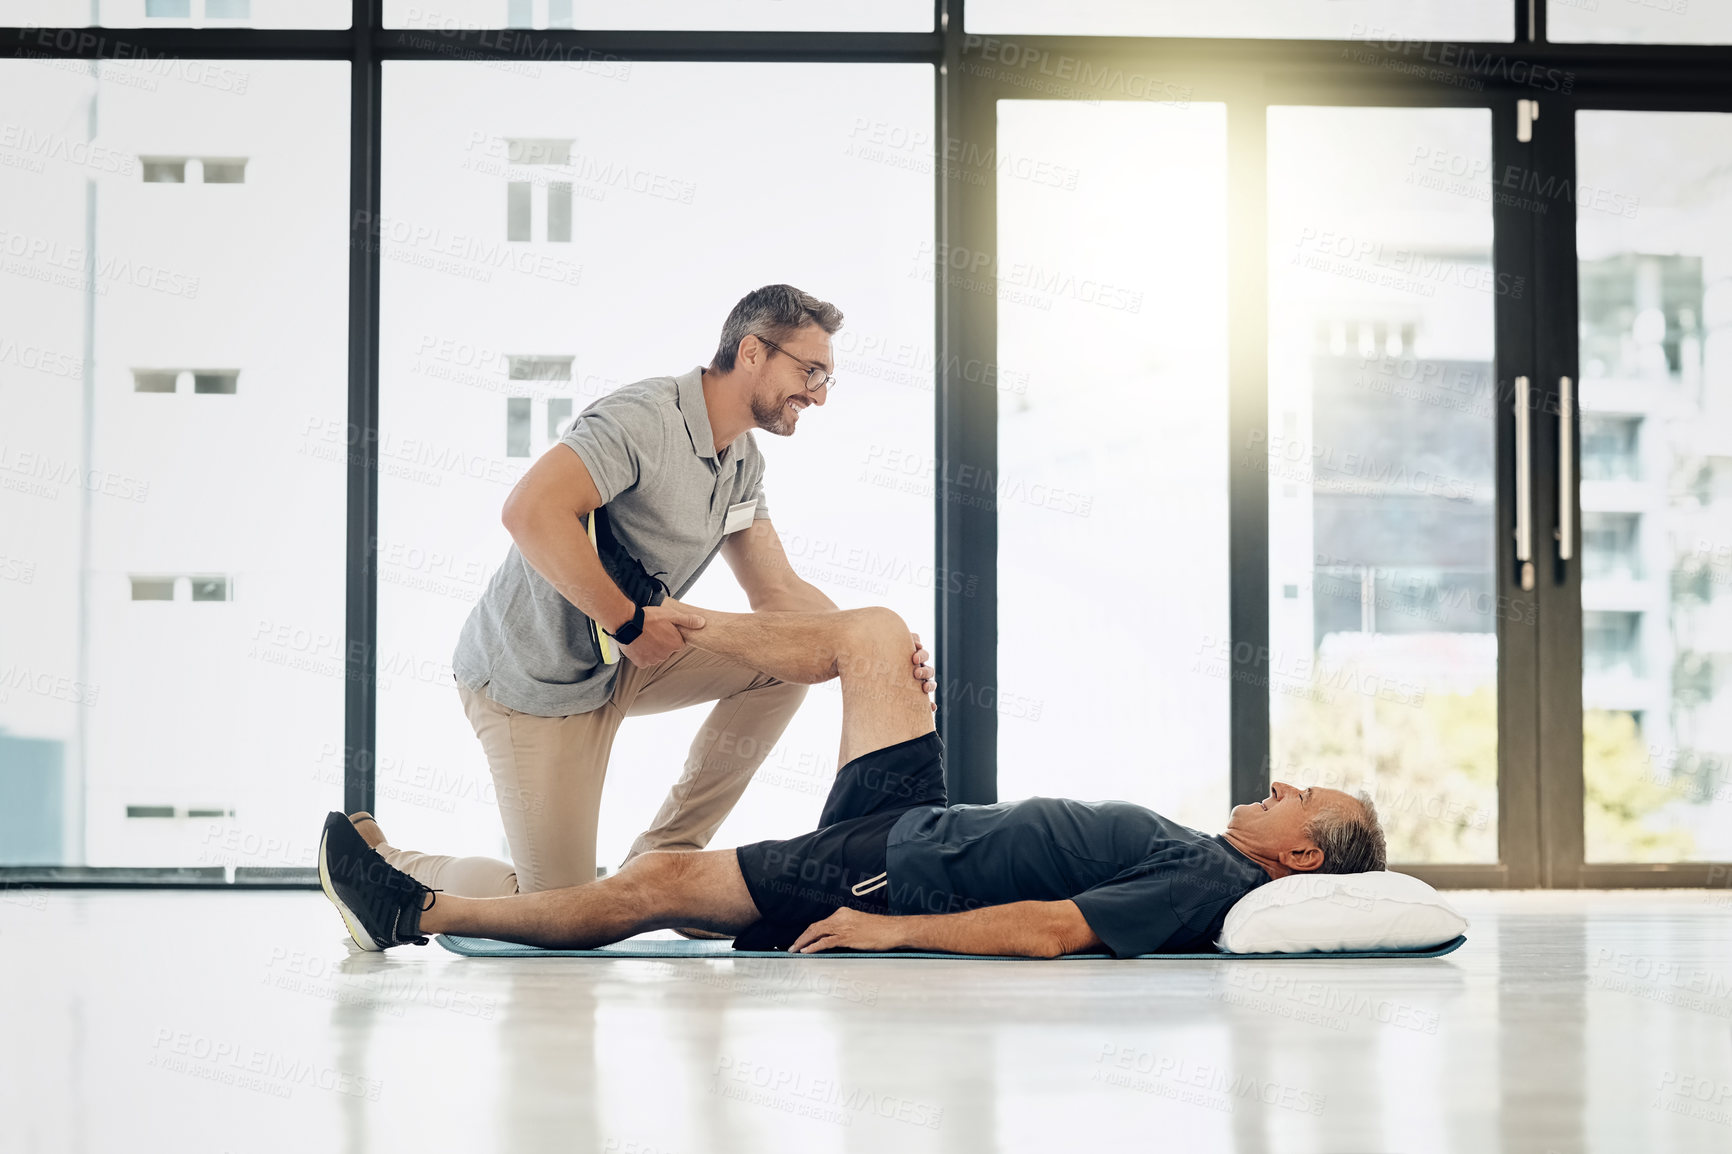 Buy stock photo Shot of a friendly physiotherapist helping his mature patient to stretch at a rehabilitation center